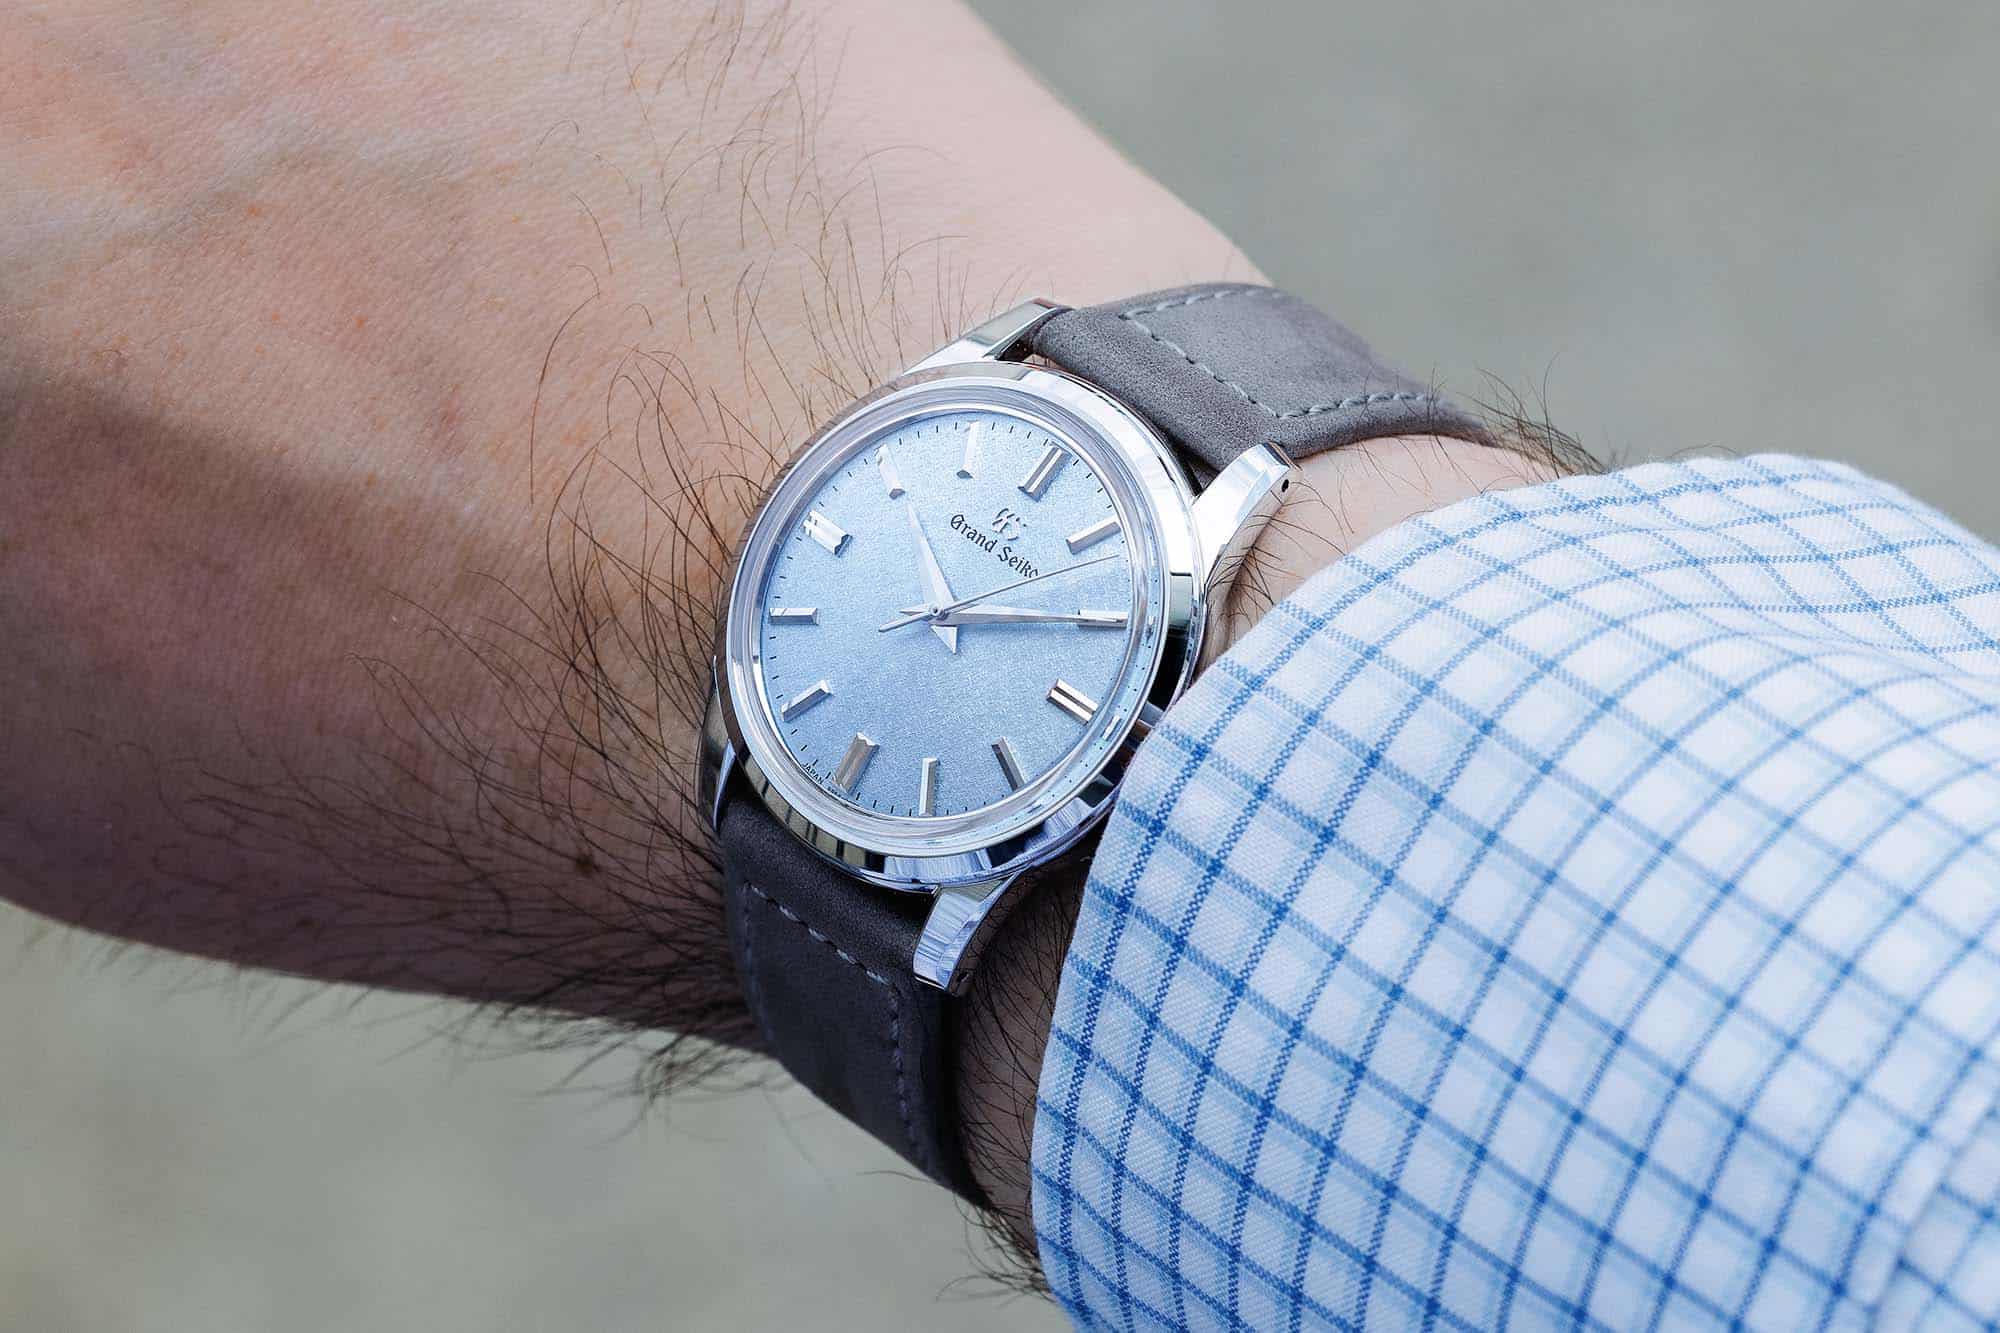 [Video] What's So Special About Grand Seiko's 37mm Dress Watch? - Worn ...